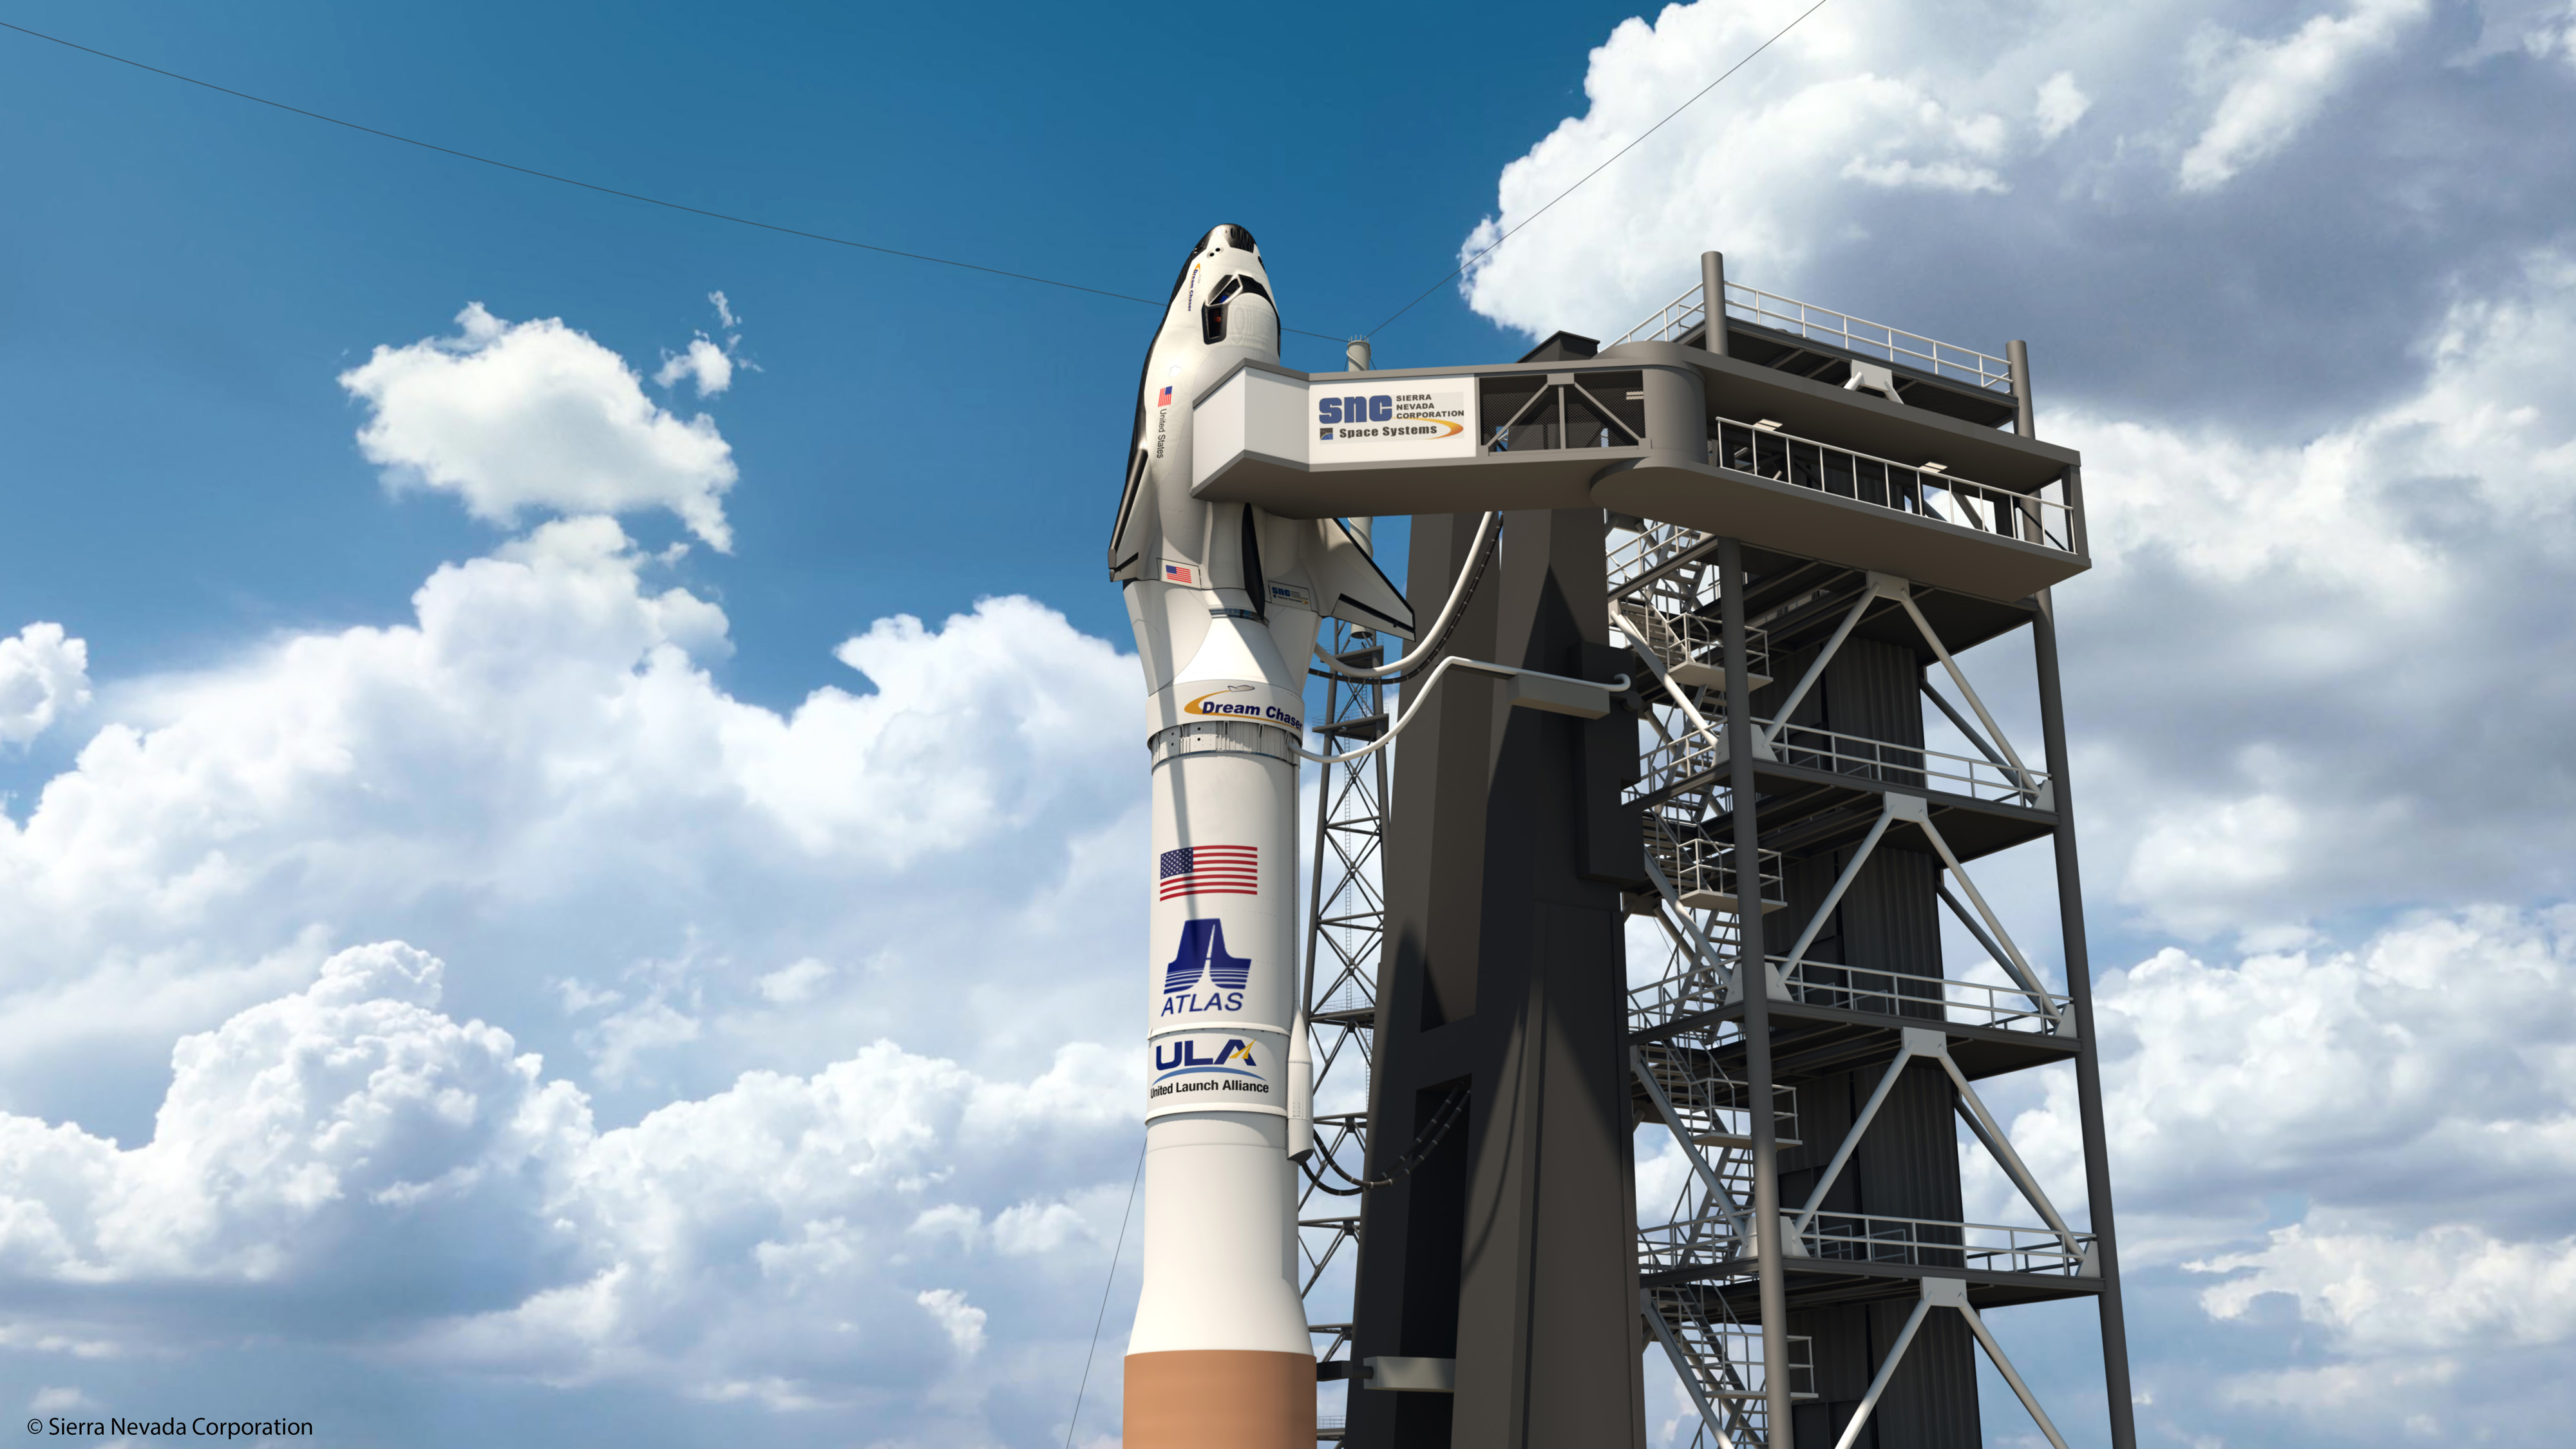 SNC's Dream Chaser atop ULA Atlas V Rocket on Space Launch Complex 41 at Cape Canaveral Air Force Station, Florida.  Credit: Sierra Nevada Corporation (SNC)